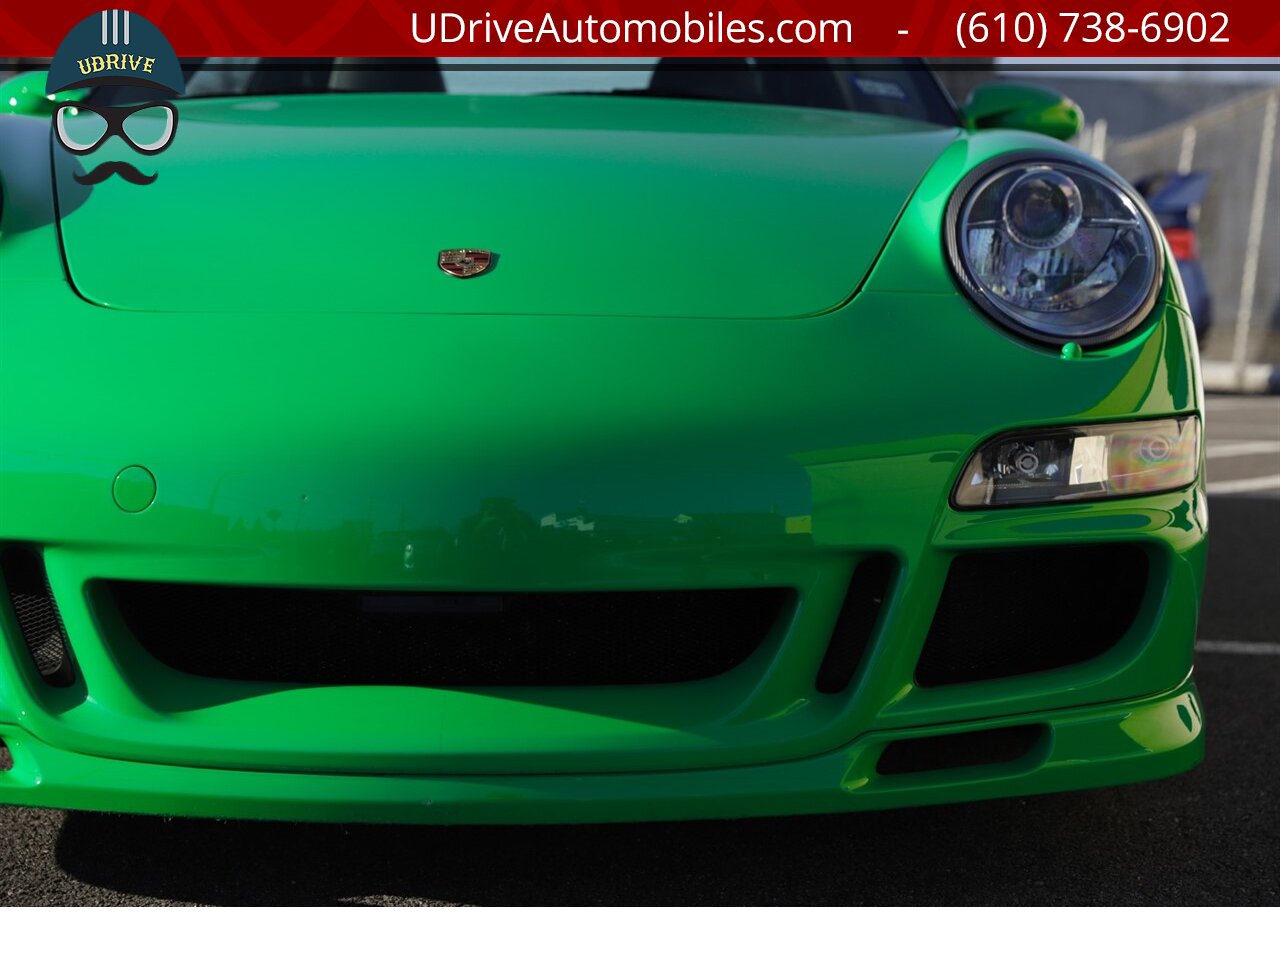 2008 Porsche 911 S 997 6Sp PTS RS Green AeroKit 1of a Kind  $118k MSRP Champion F77 Pkg RG5 Whls - Photo 13 - West Chester, PA 19382